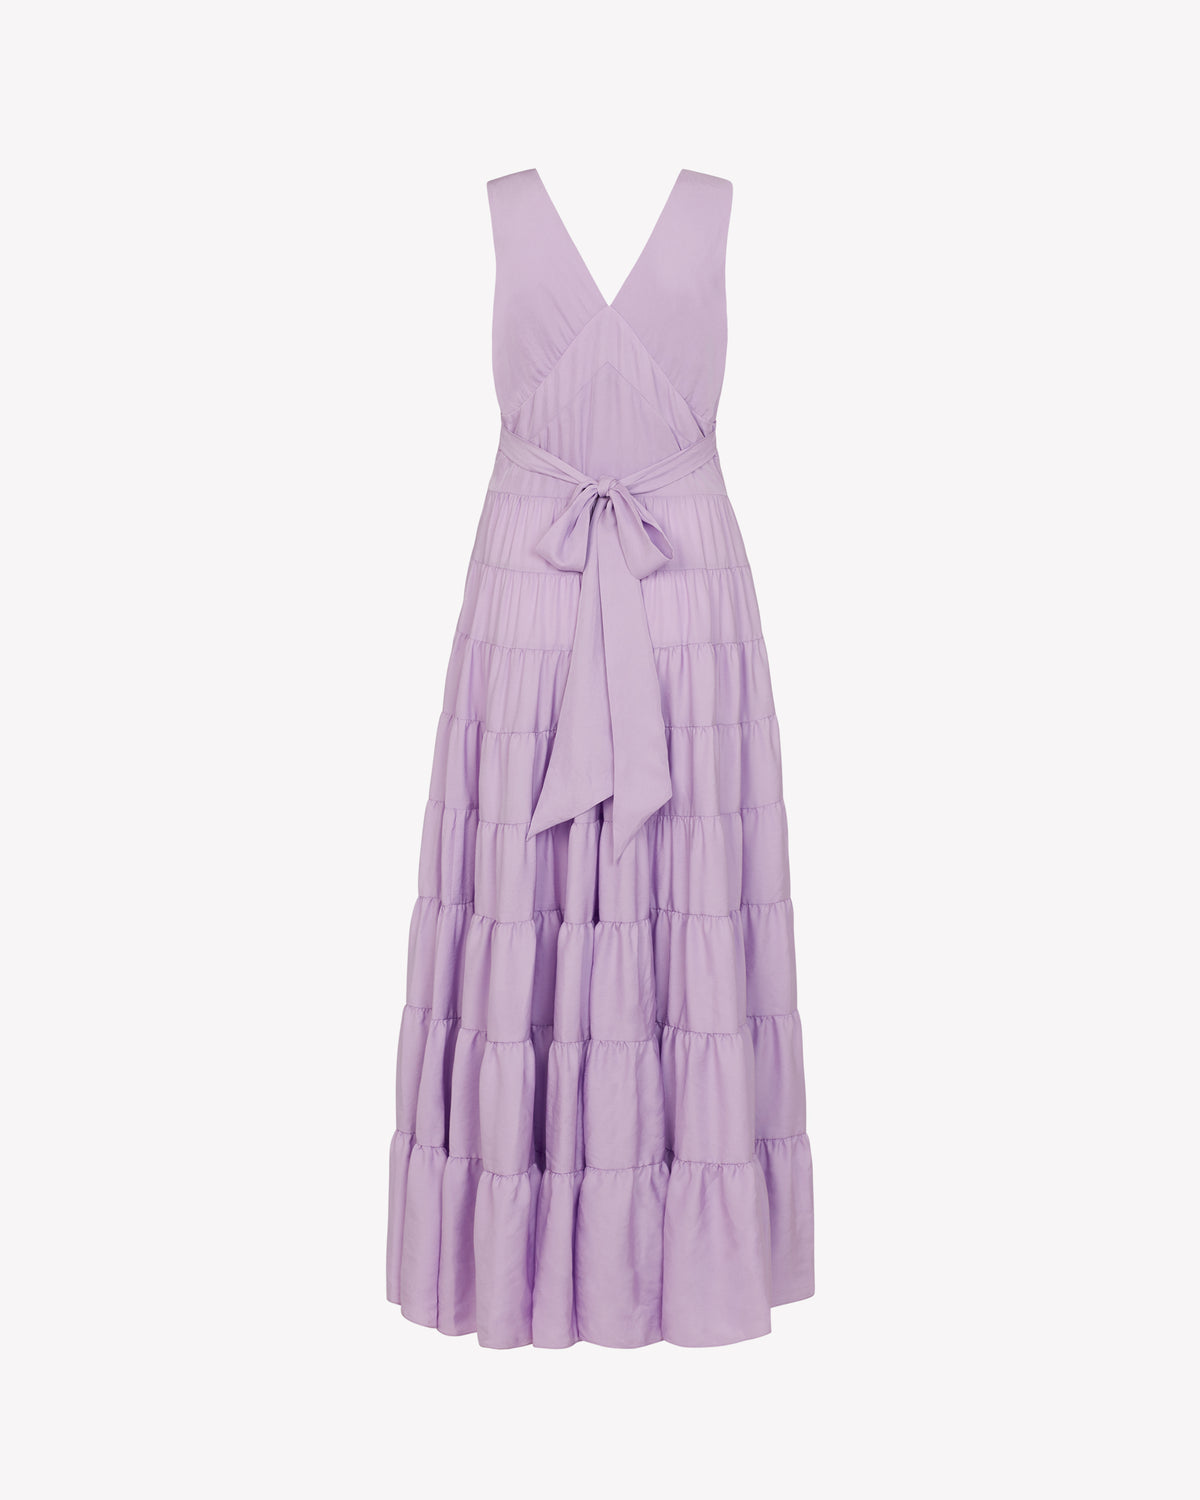 Tiered Summer Dress - Heather Lilac SERENA BUTE